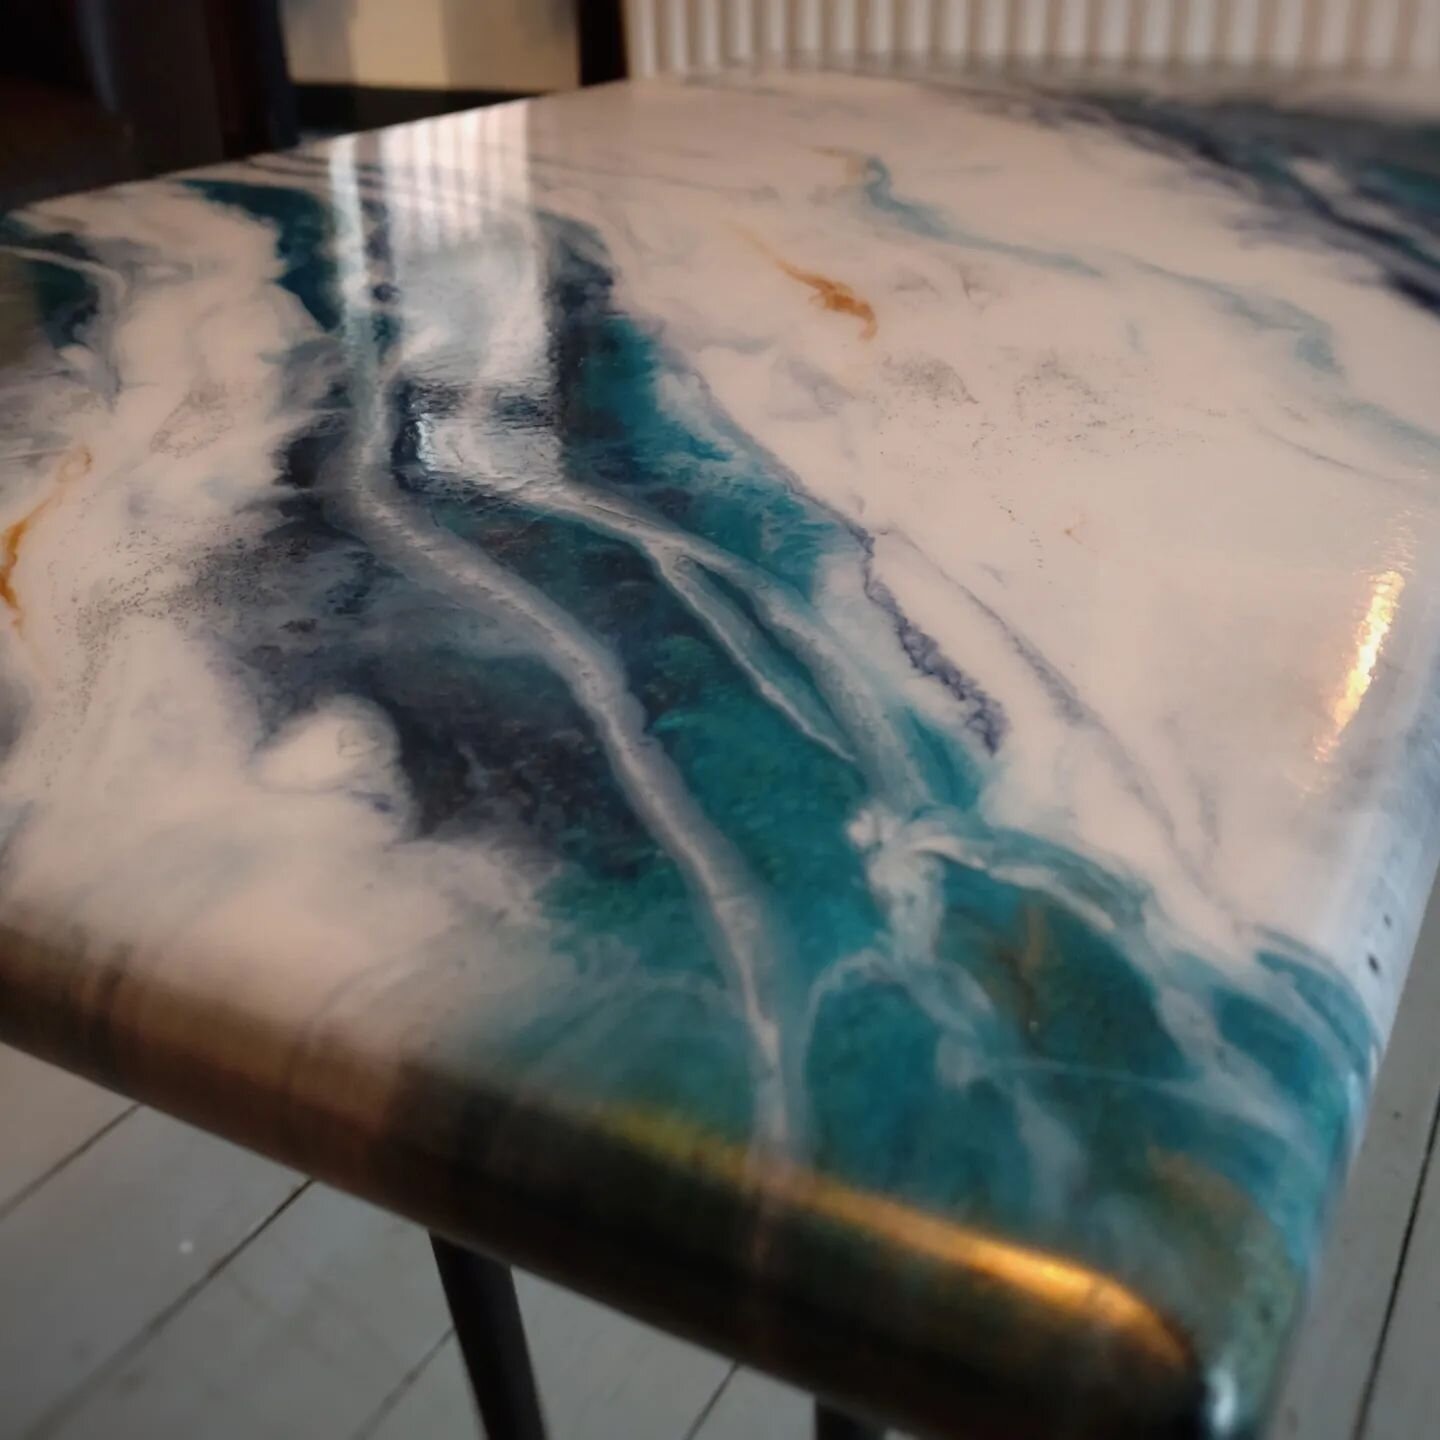 Teal Marble Effect table for the recent Facebook competition winner 

Tag someone who loves the colour Teal 

Thank you all for your support in my mission to create timeless functional art

Next up is an industrial copper work desk 
Happy New Year 🫶